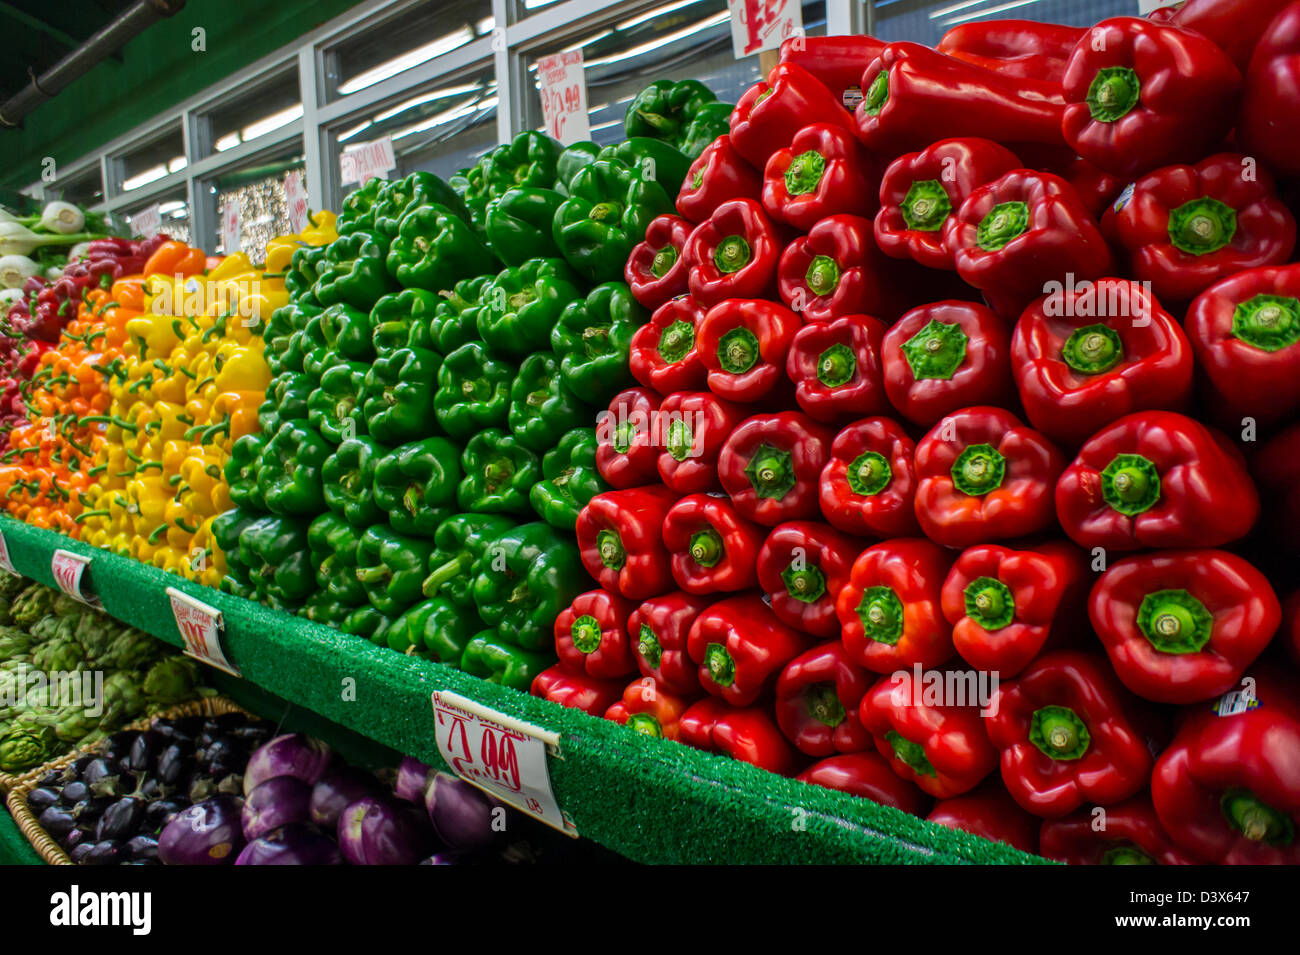 https://c8.alamy.com/comp/D3X647/red-green-yellow-and-orange-peppers-and-other-vegetables-are-seen-D3X647.jpg